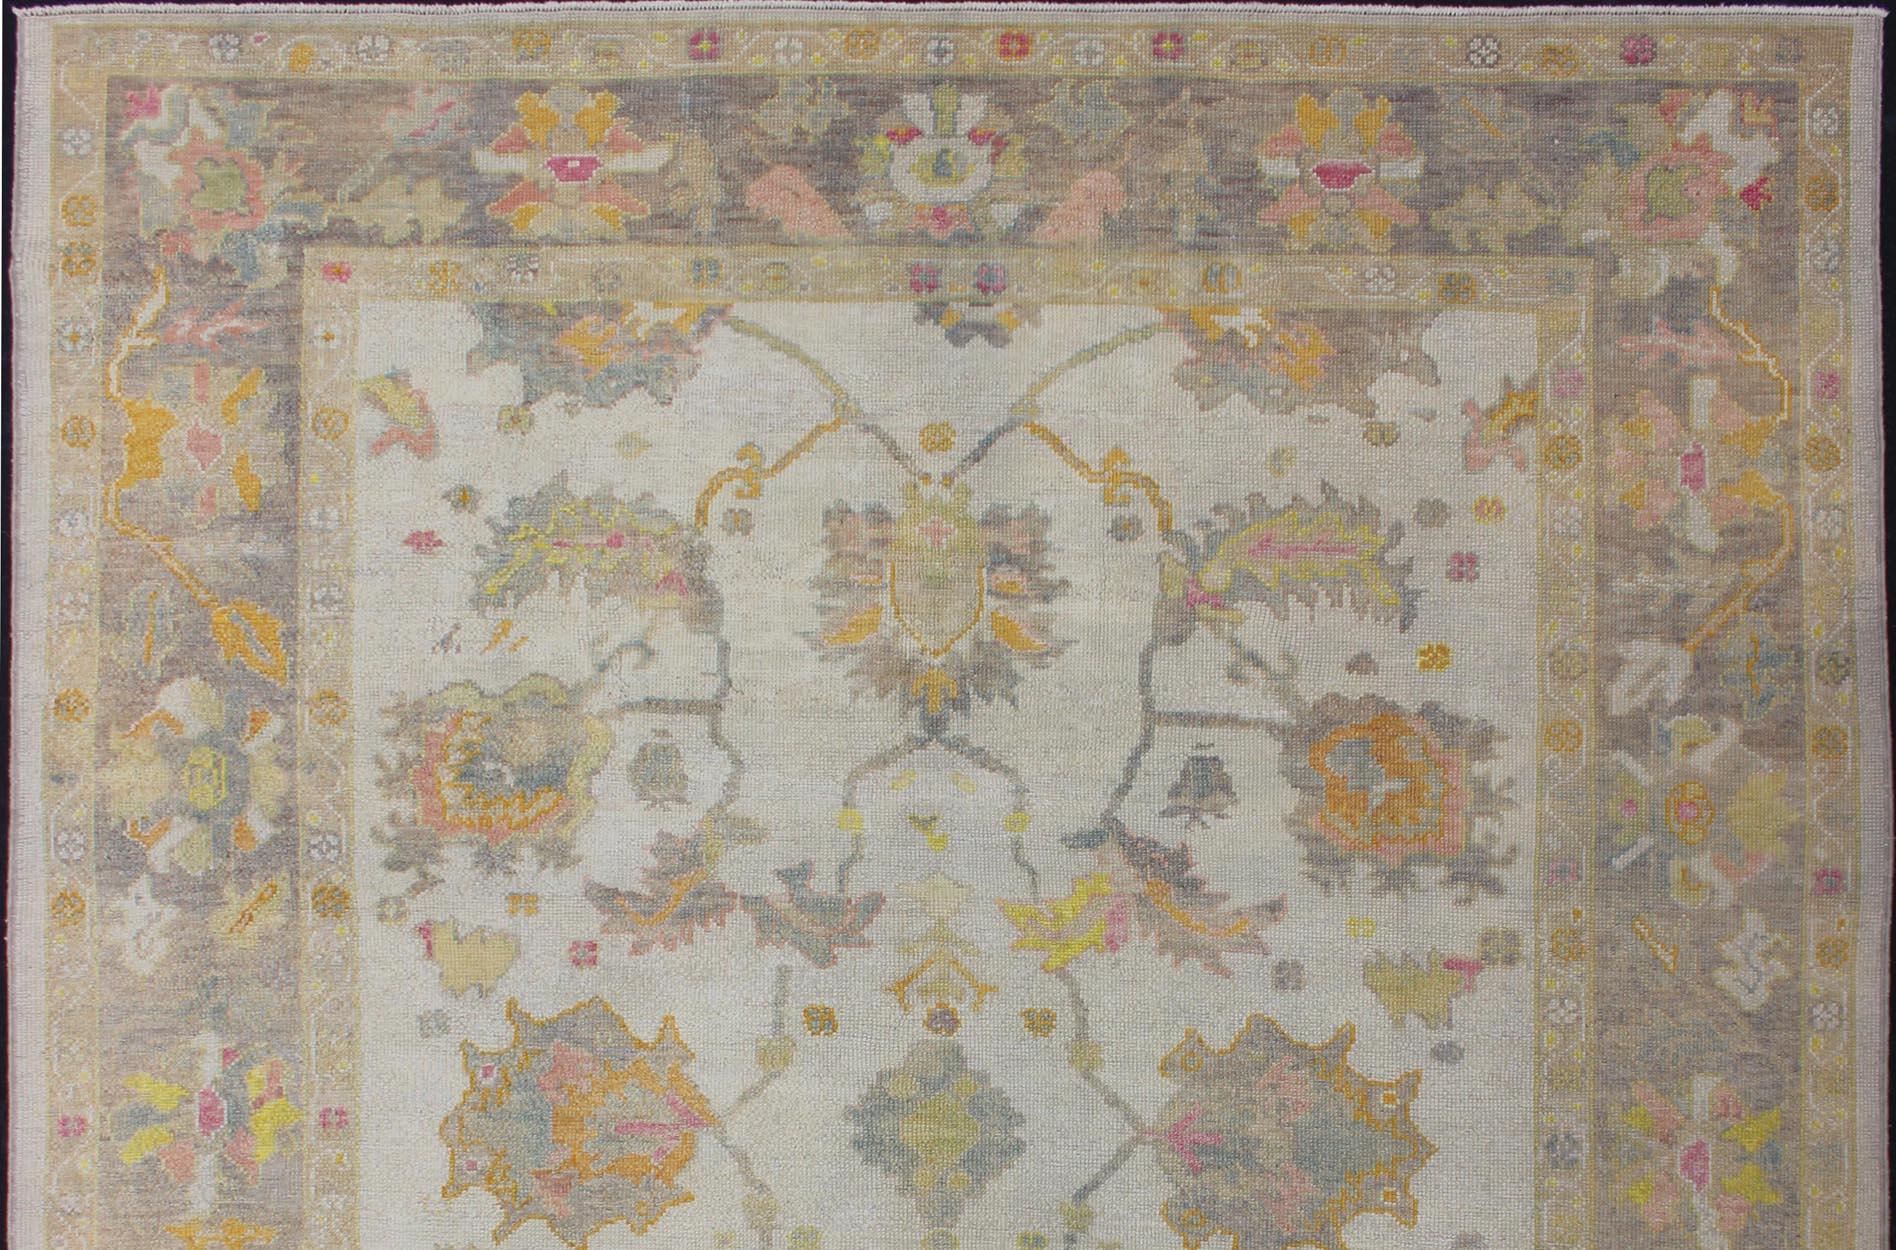 Turkish Oushak rug with array of light and medium tone colors and design, rug EN-176126, country of origin / type: Turkey / Oushak

This traditional Oushak rug from Turkey features a subdued, neutral color palette and an all-over design of floral